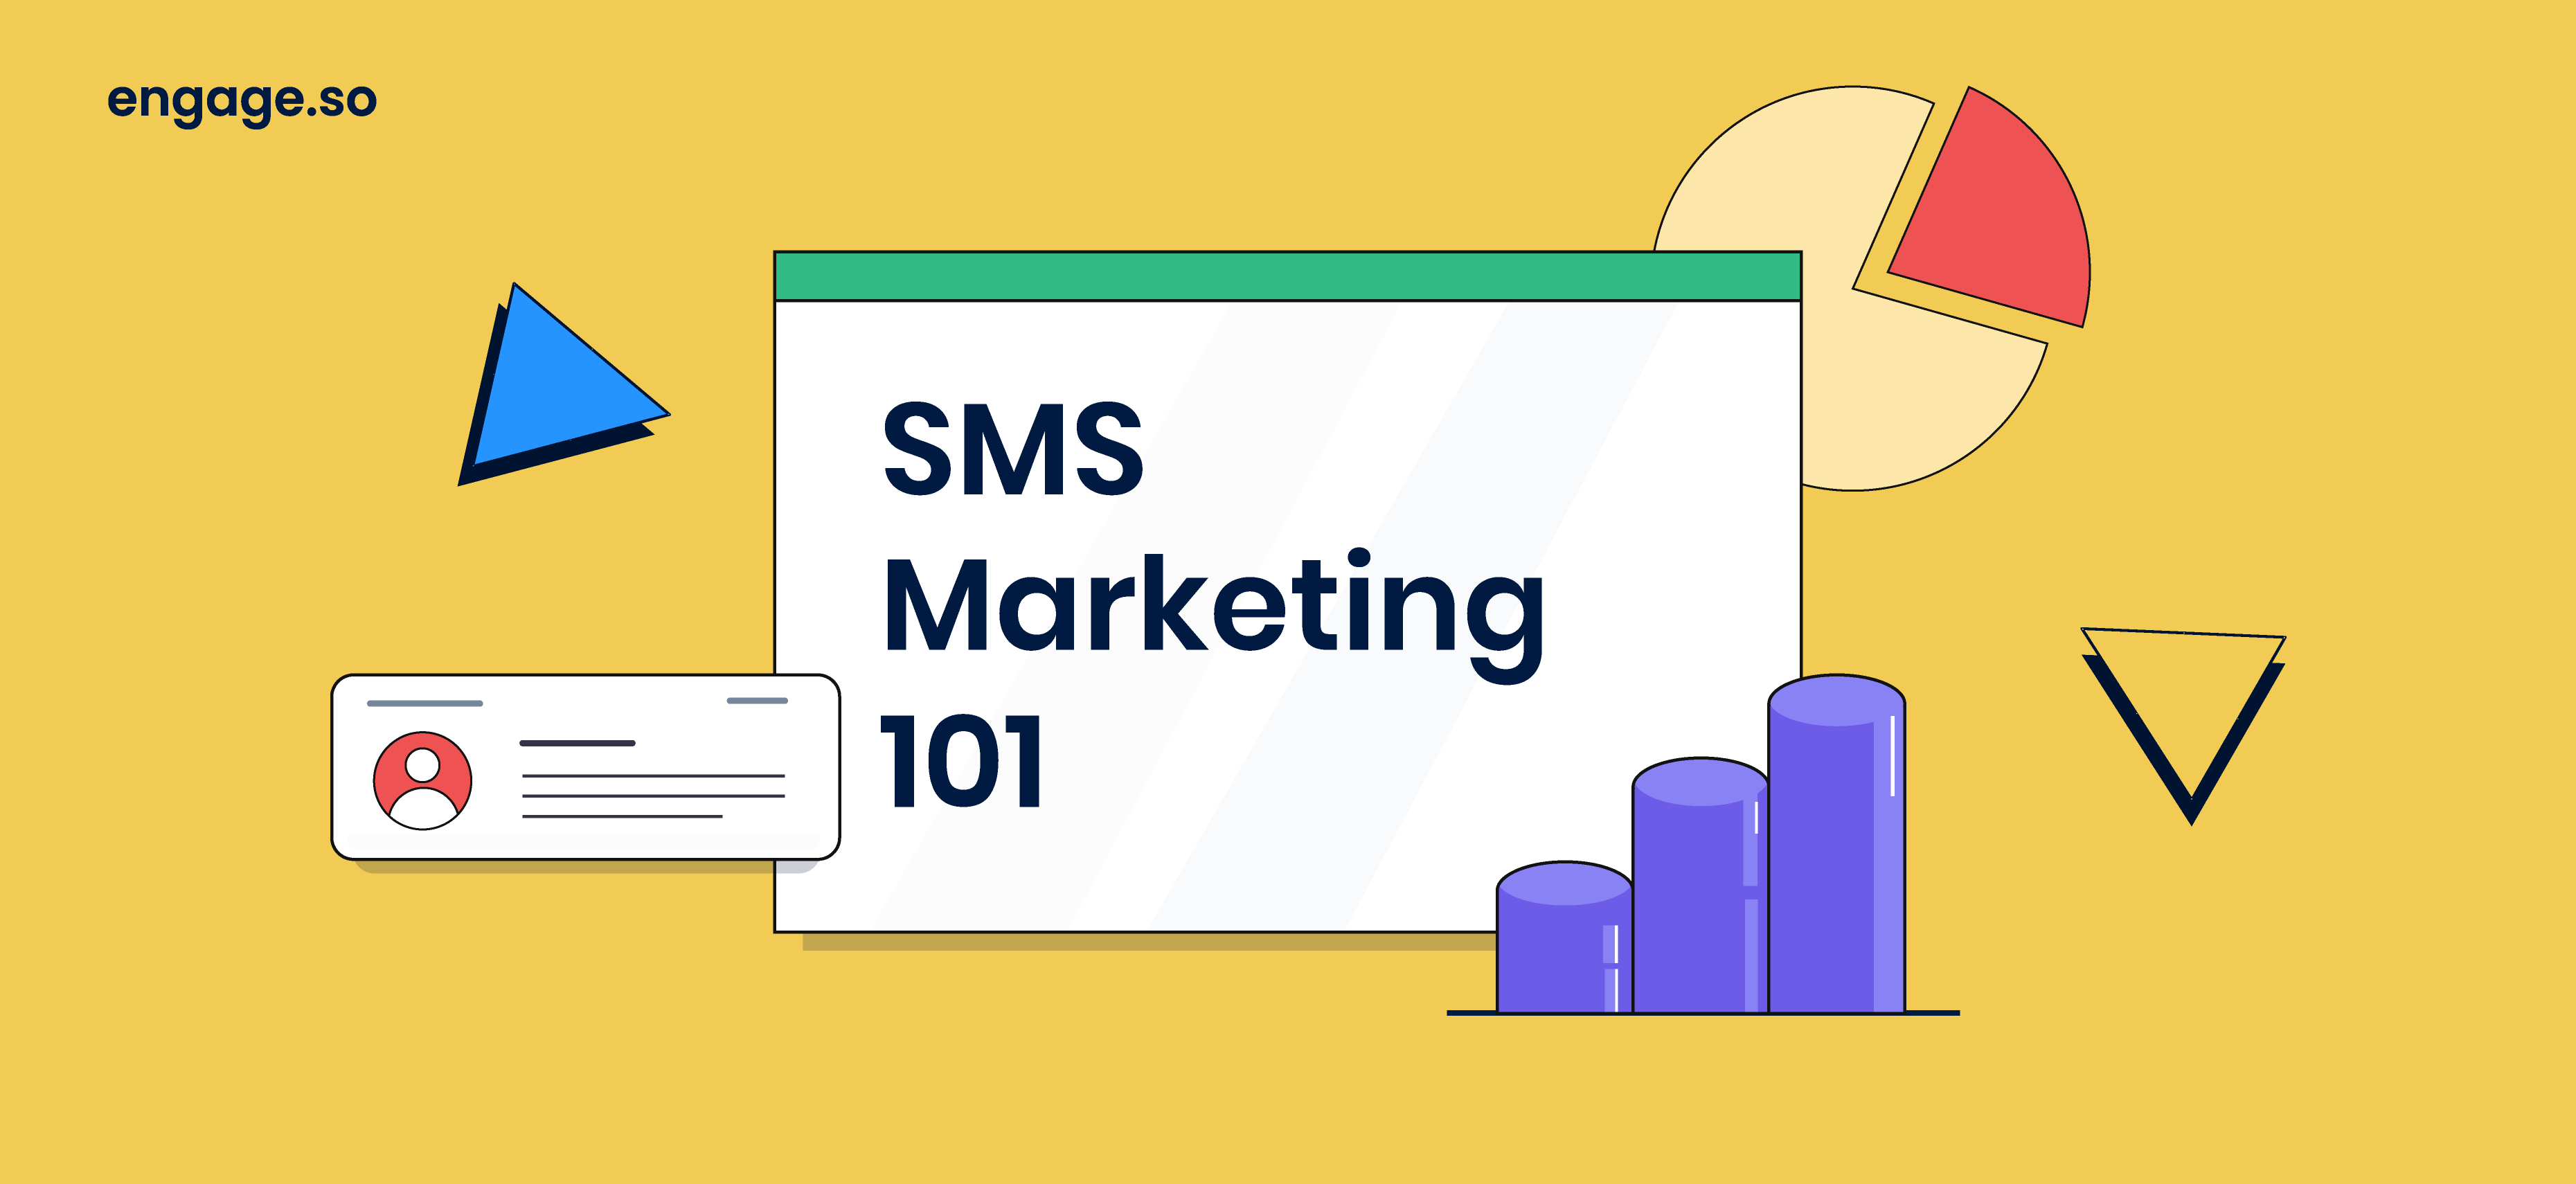 SMS Marketing 101: Introduction to SMS Marketing for Business Owners